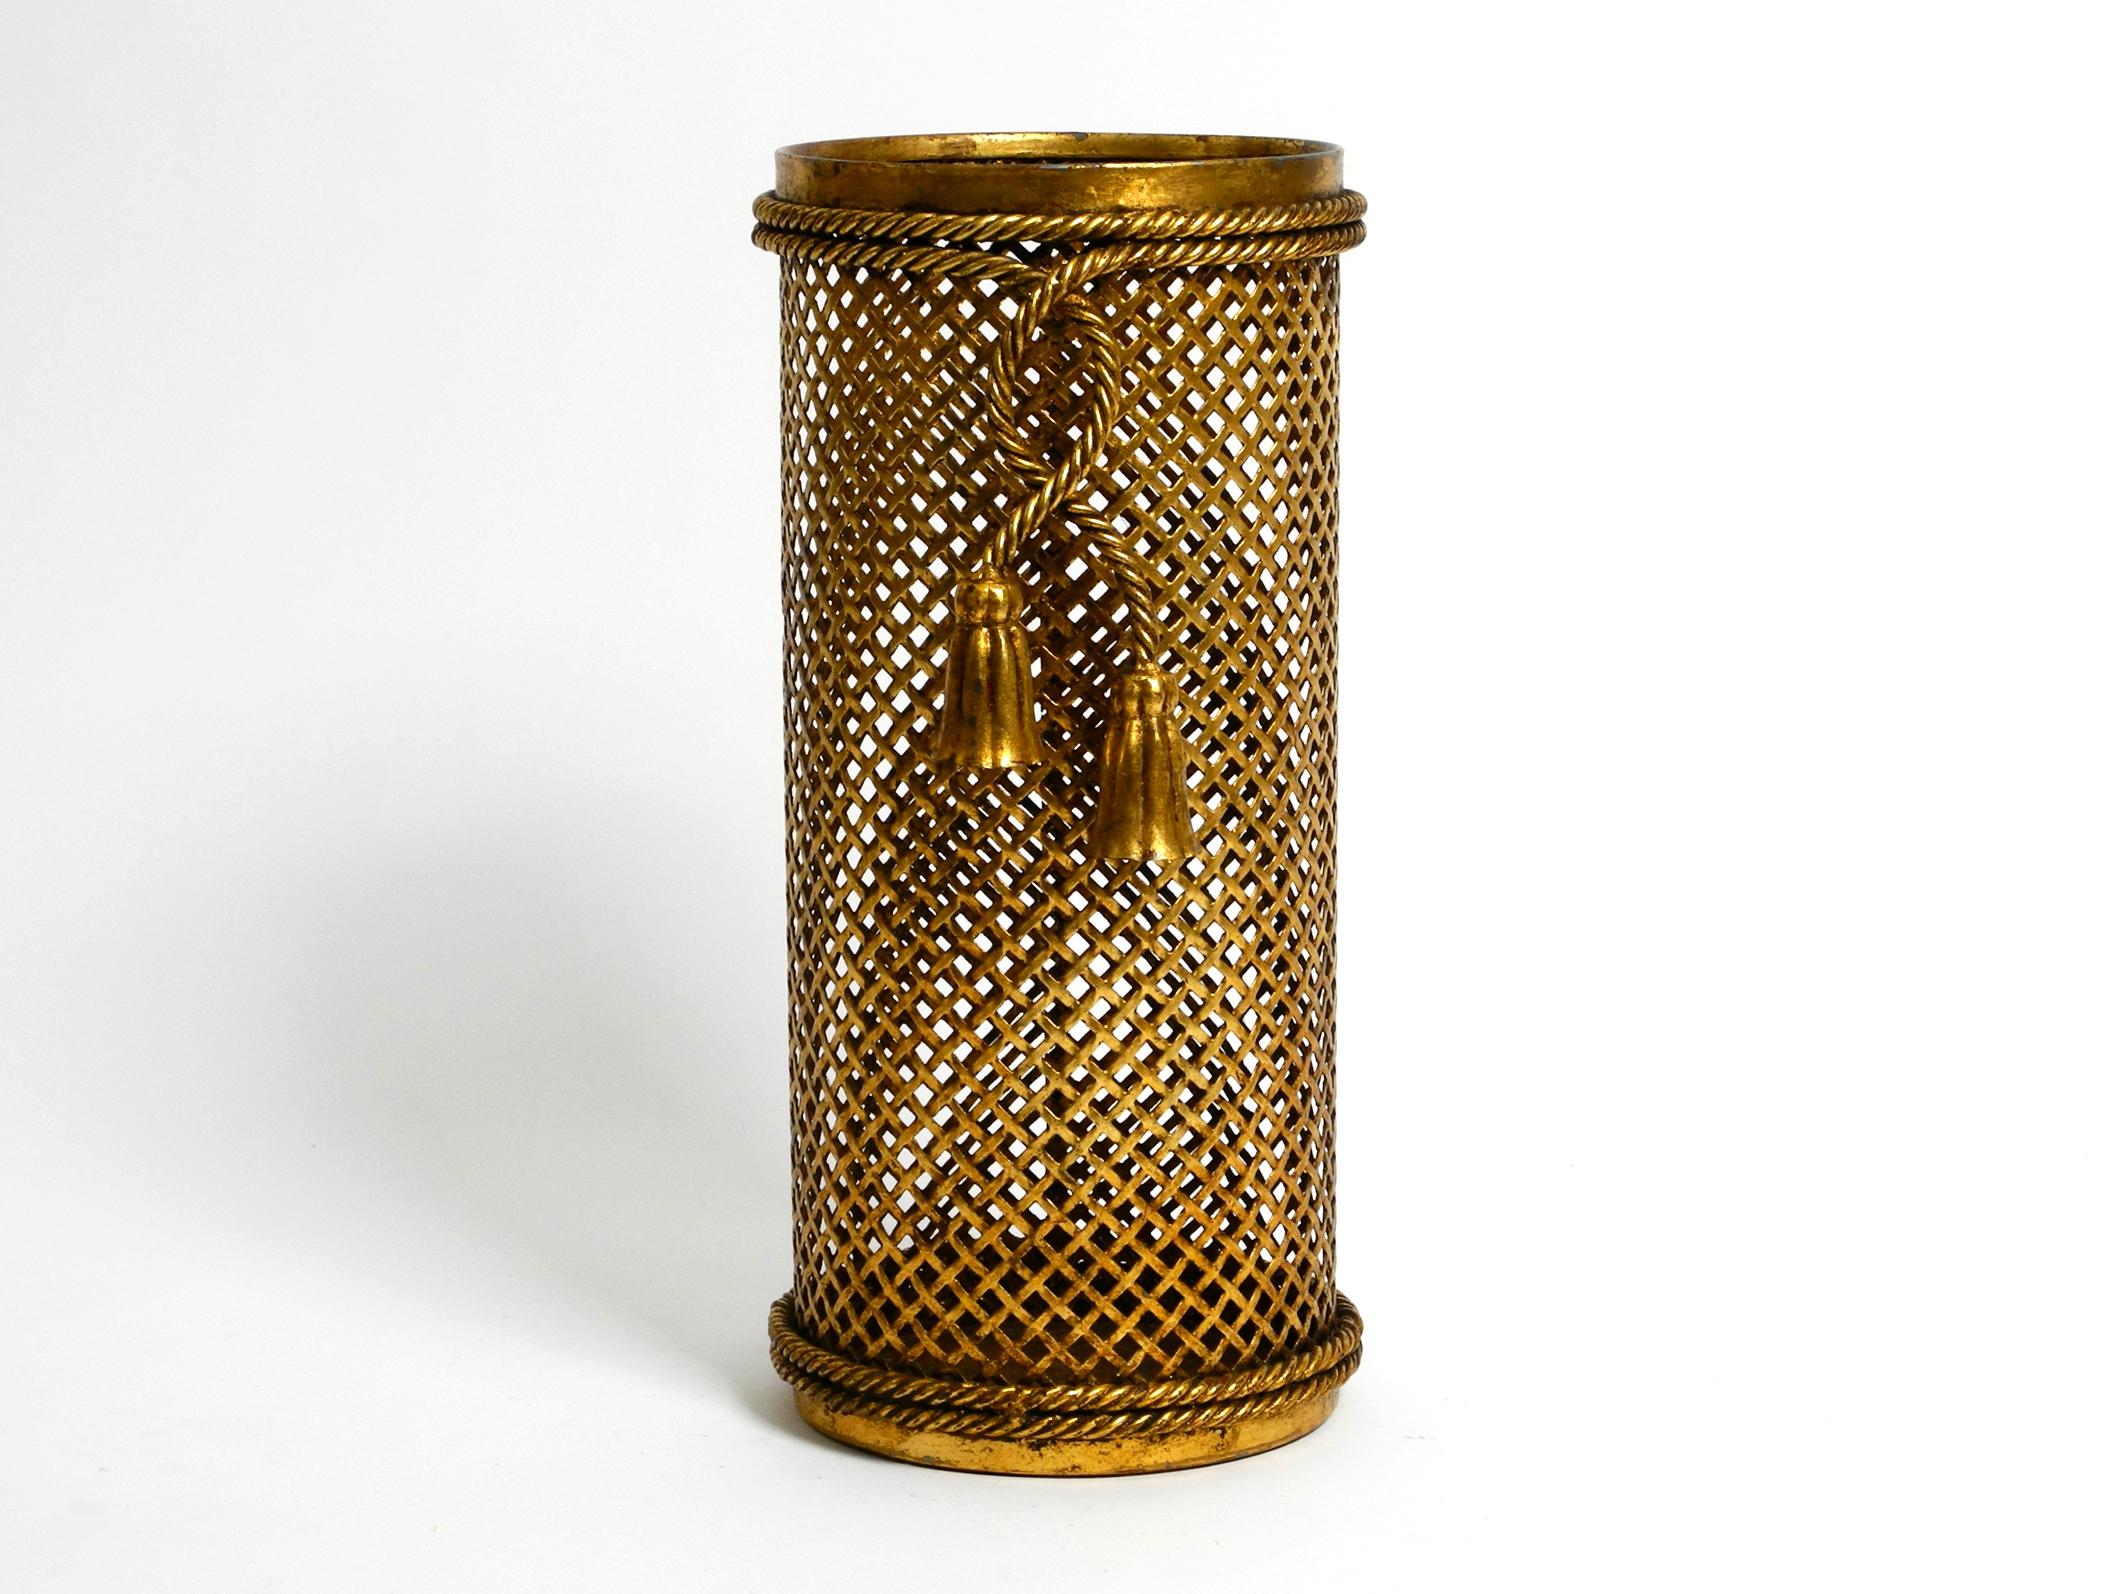 Very elegant Mid Century Regency umbrella stand made of gilded metal.
Manufacturer is Li Puma. Made in Italy.
Made from perforated gold plated metal. Very high-quality elegant processing.
Beautiful 1960s design with many details.
Very good